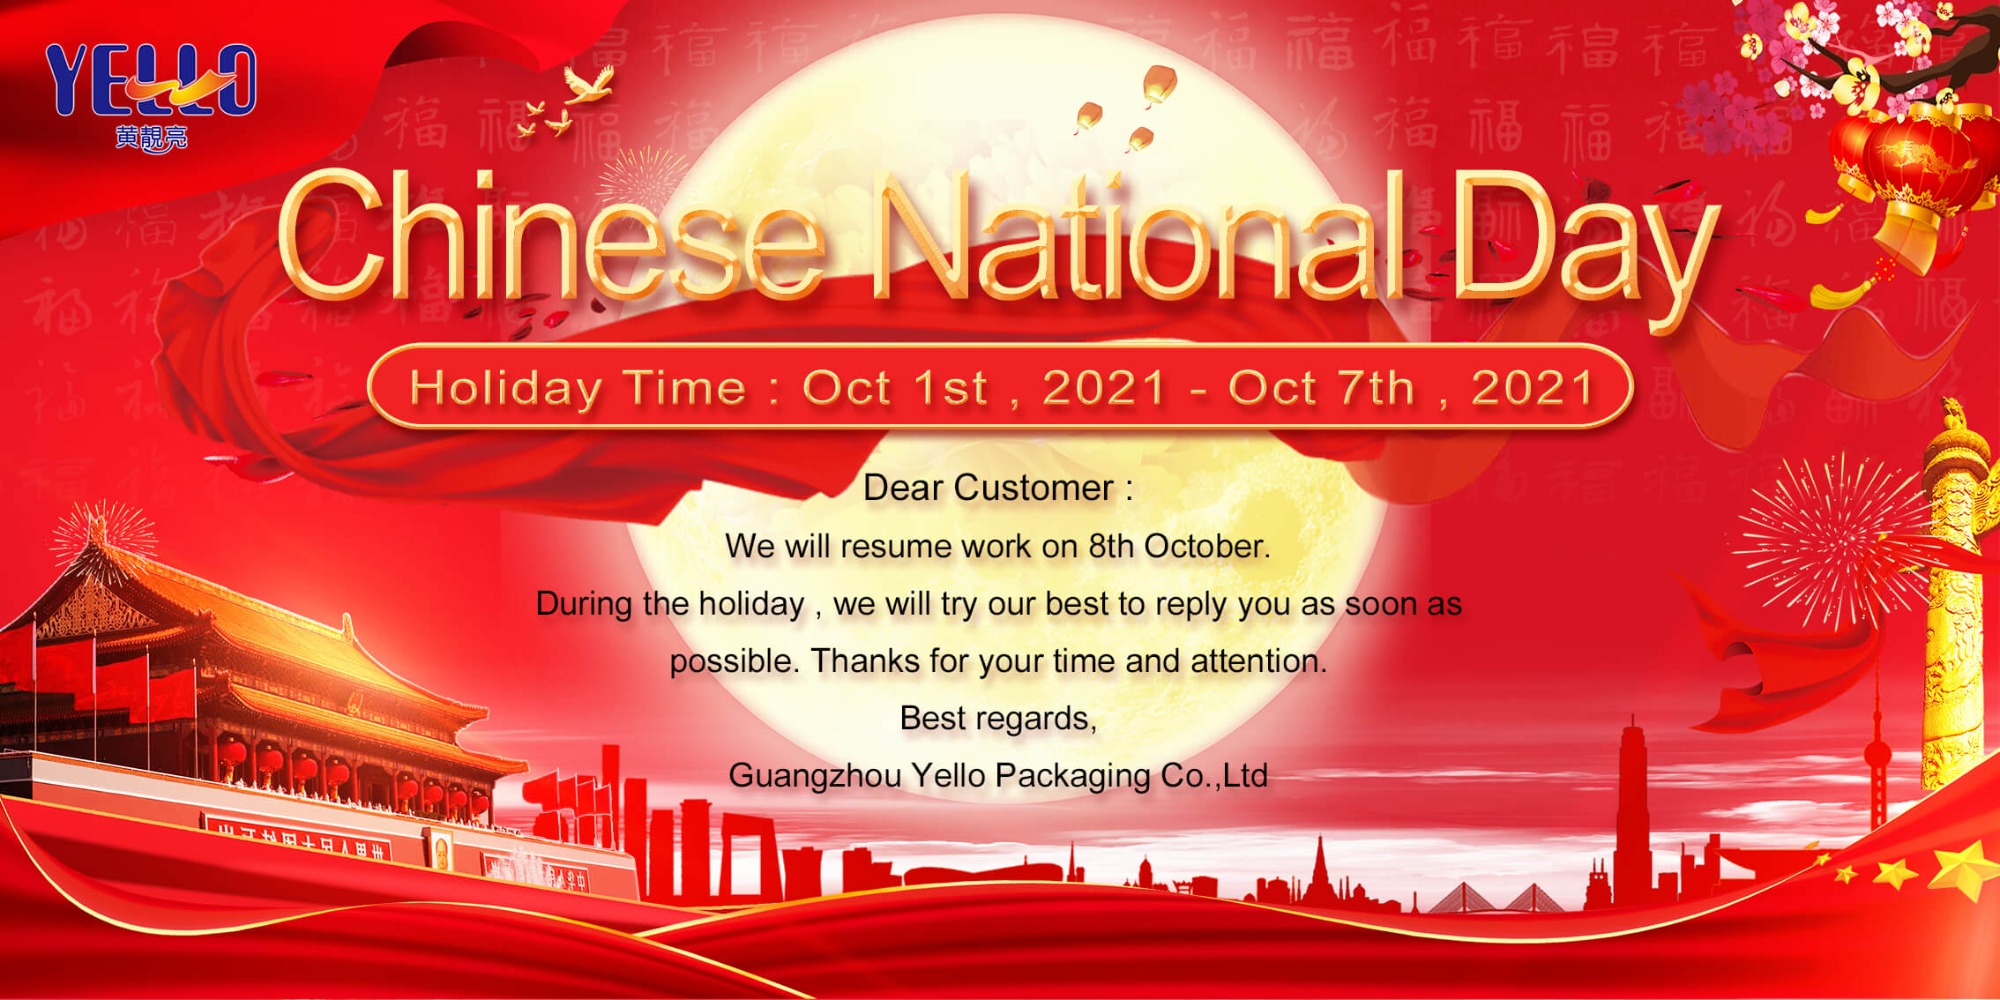 Holiday Notice - Chinese National Day